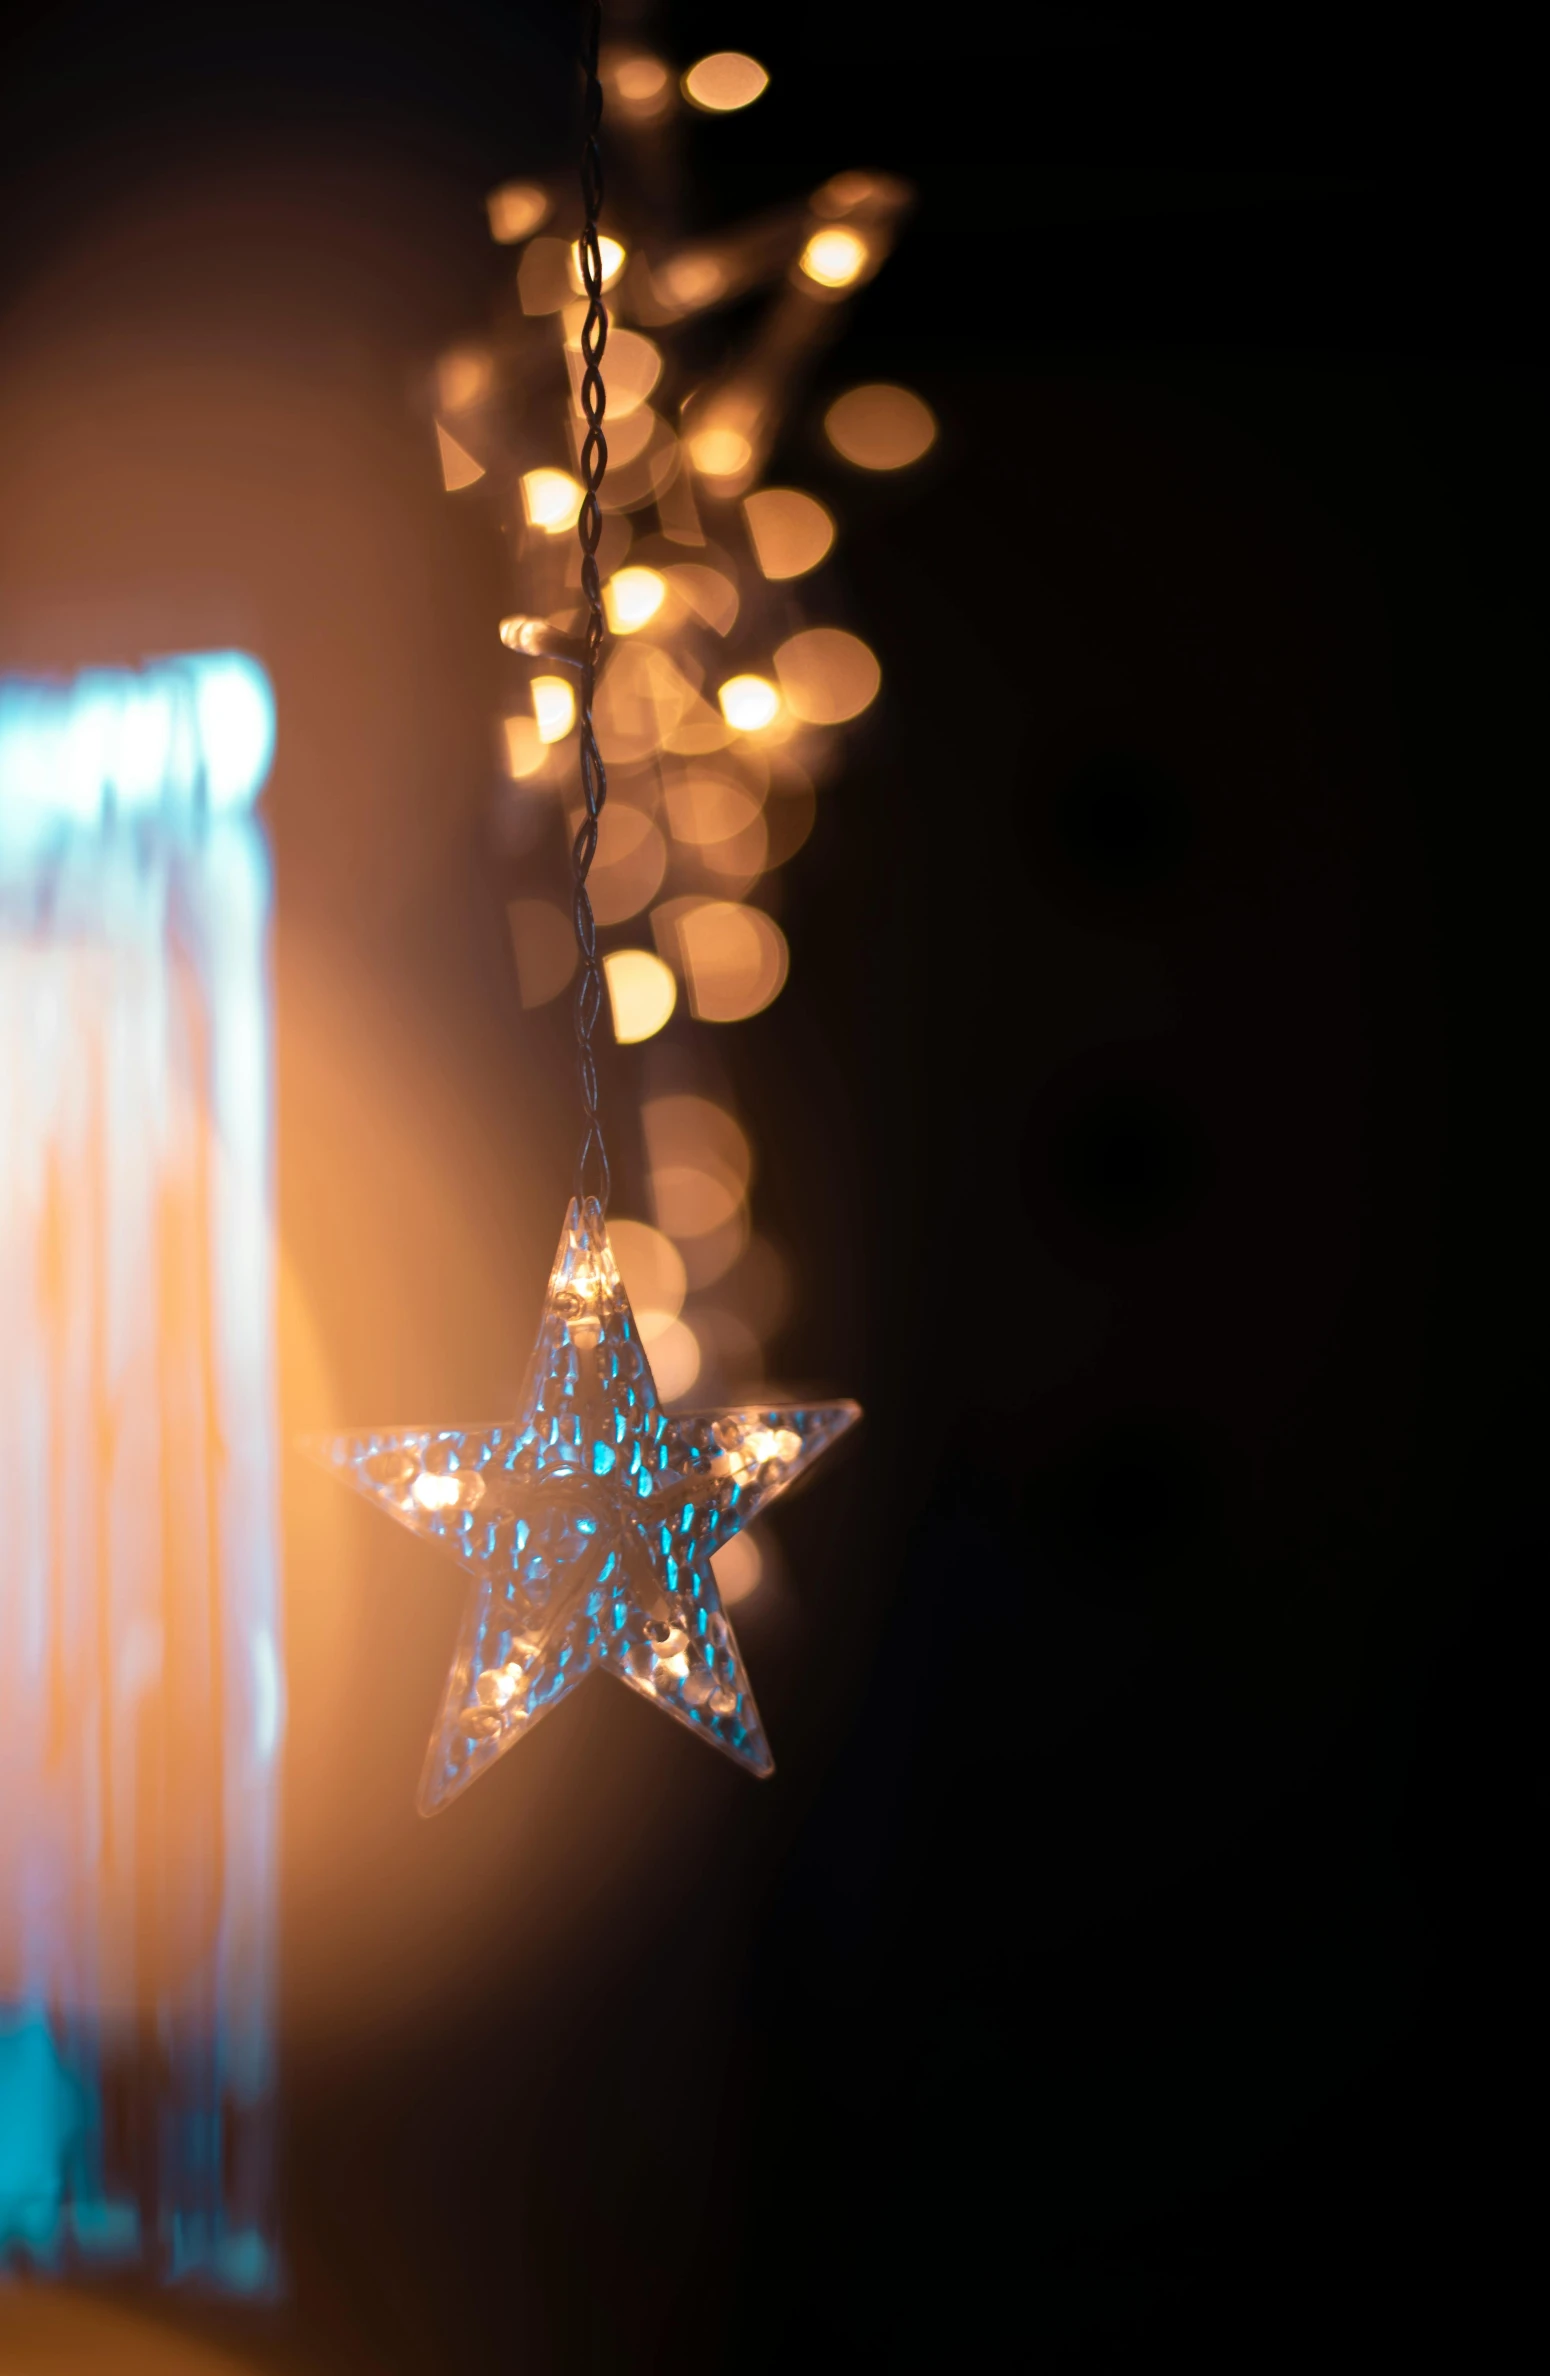 a close up of a star hanging from a string, a picture, light and space, windows lit up, full res, reflection of led lights, profile image